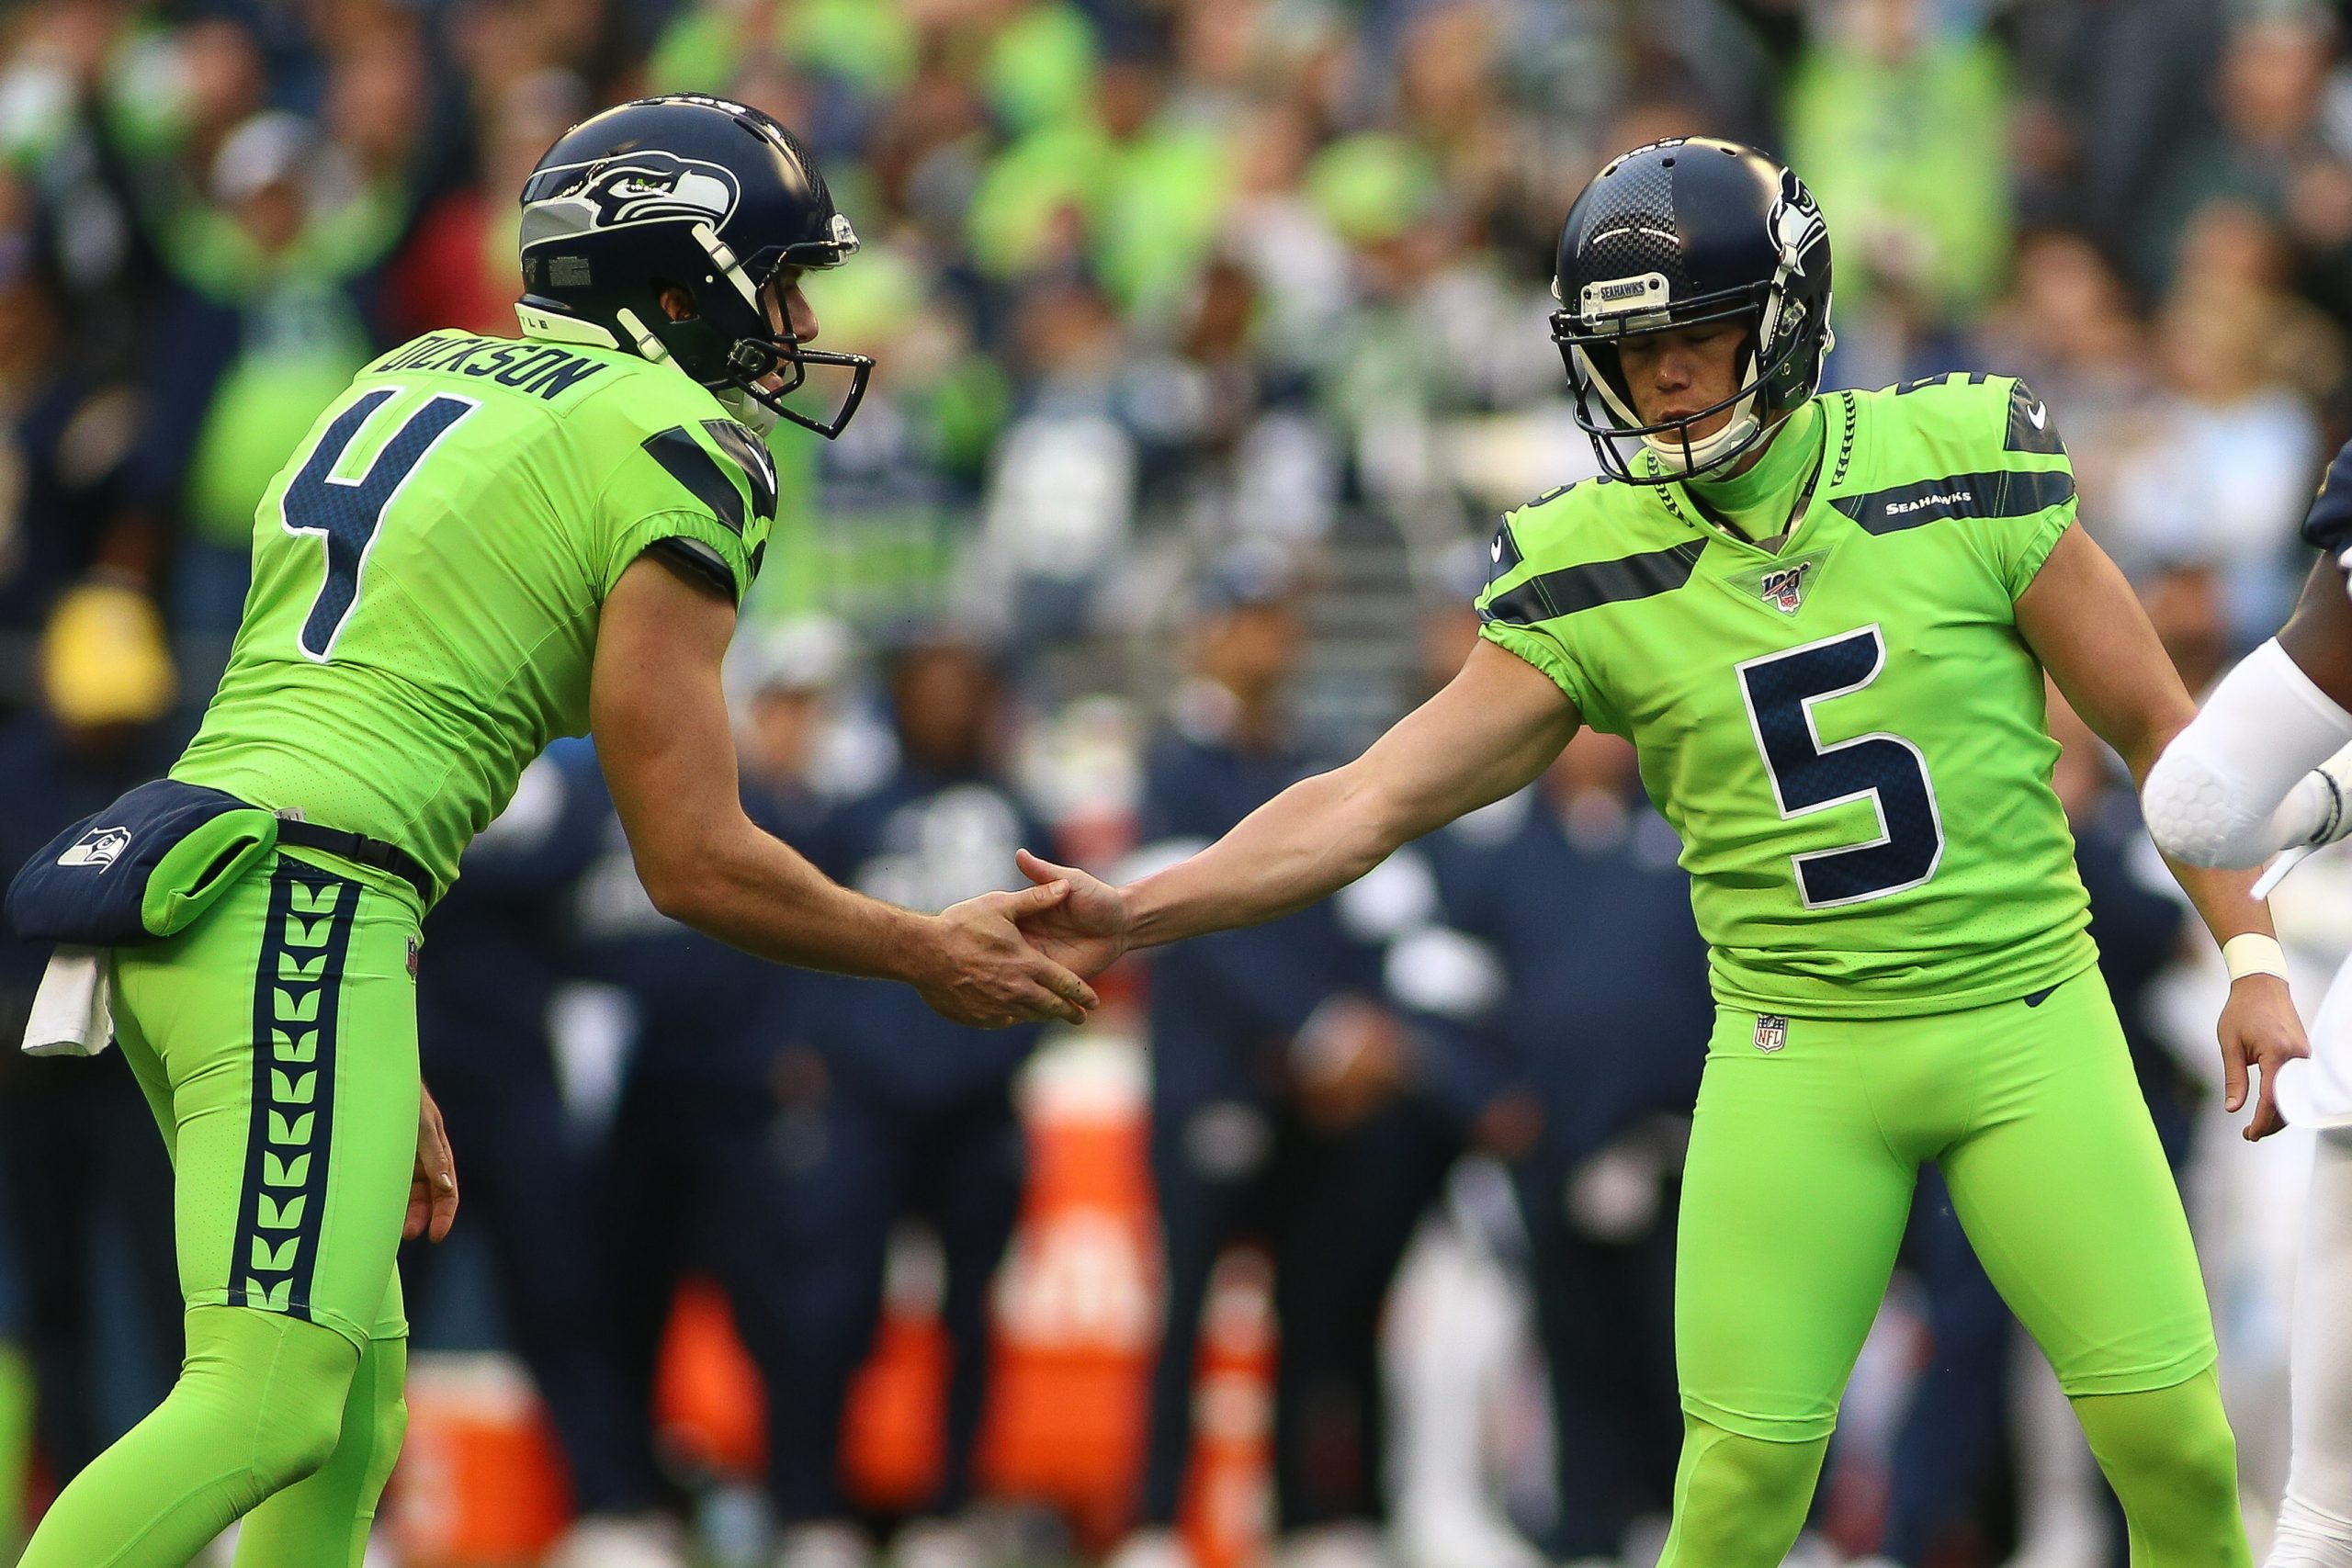 October 3, 2019: Seattle Seahawks holder Michael Dickson (4) and Seattle Seahawks kicker Jason Myers (5) celebrate after a made PAT during a game between the Los Angeles Rams and Seattle Huskies at CenturyLink Field in Seattle, WA. The Seahawks won 30-29. /CSM NFL, American Football Herren, USA 2019: Rams vs Seahawks OCT 03 - ZUMAc04_ 20191003_zaf_c04_266 Copyright: xSeanxBrownx